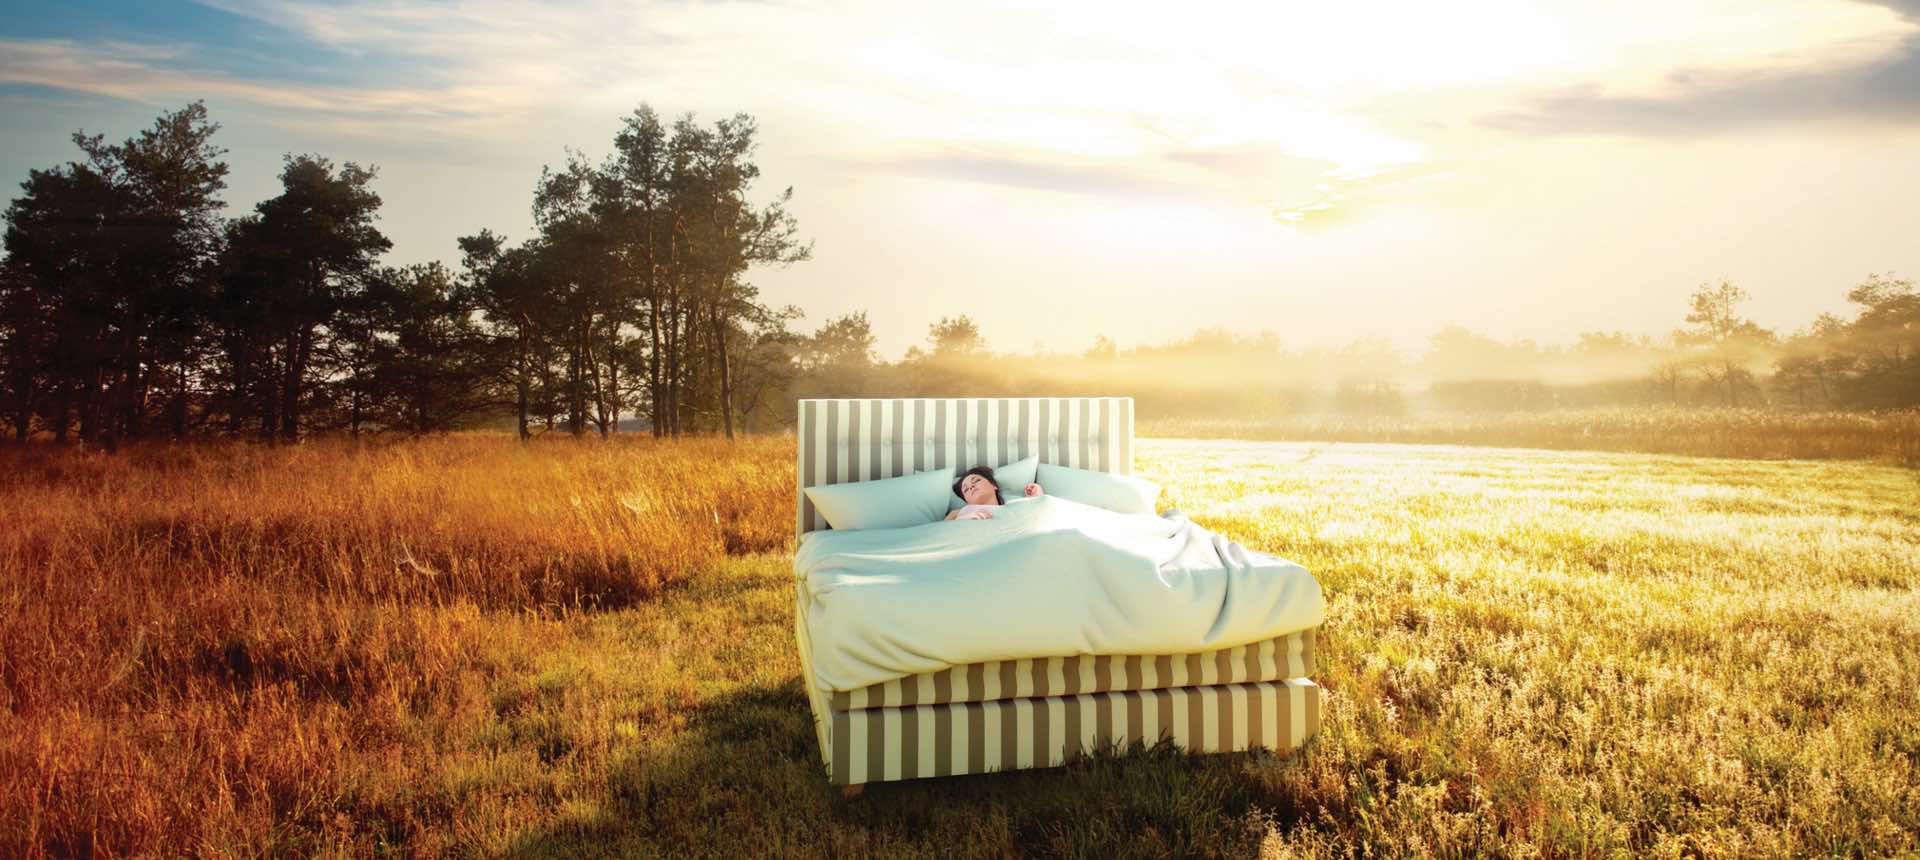 pauly-beds-continental-luxury-mattress-in-nature